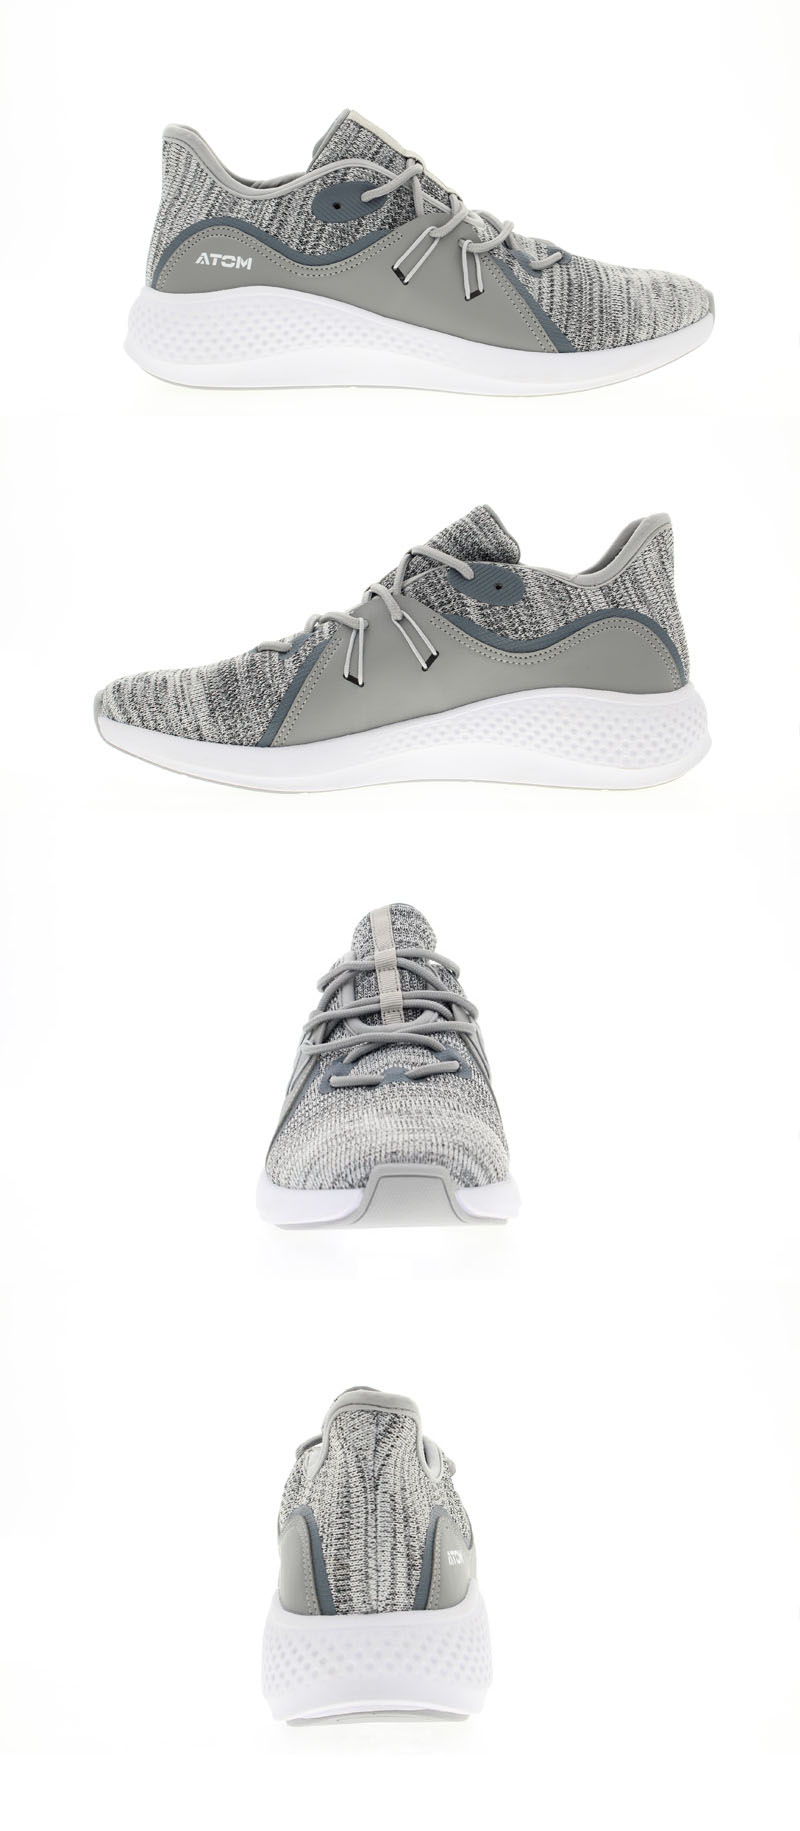 Mix grey fabric shoes for you